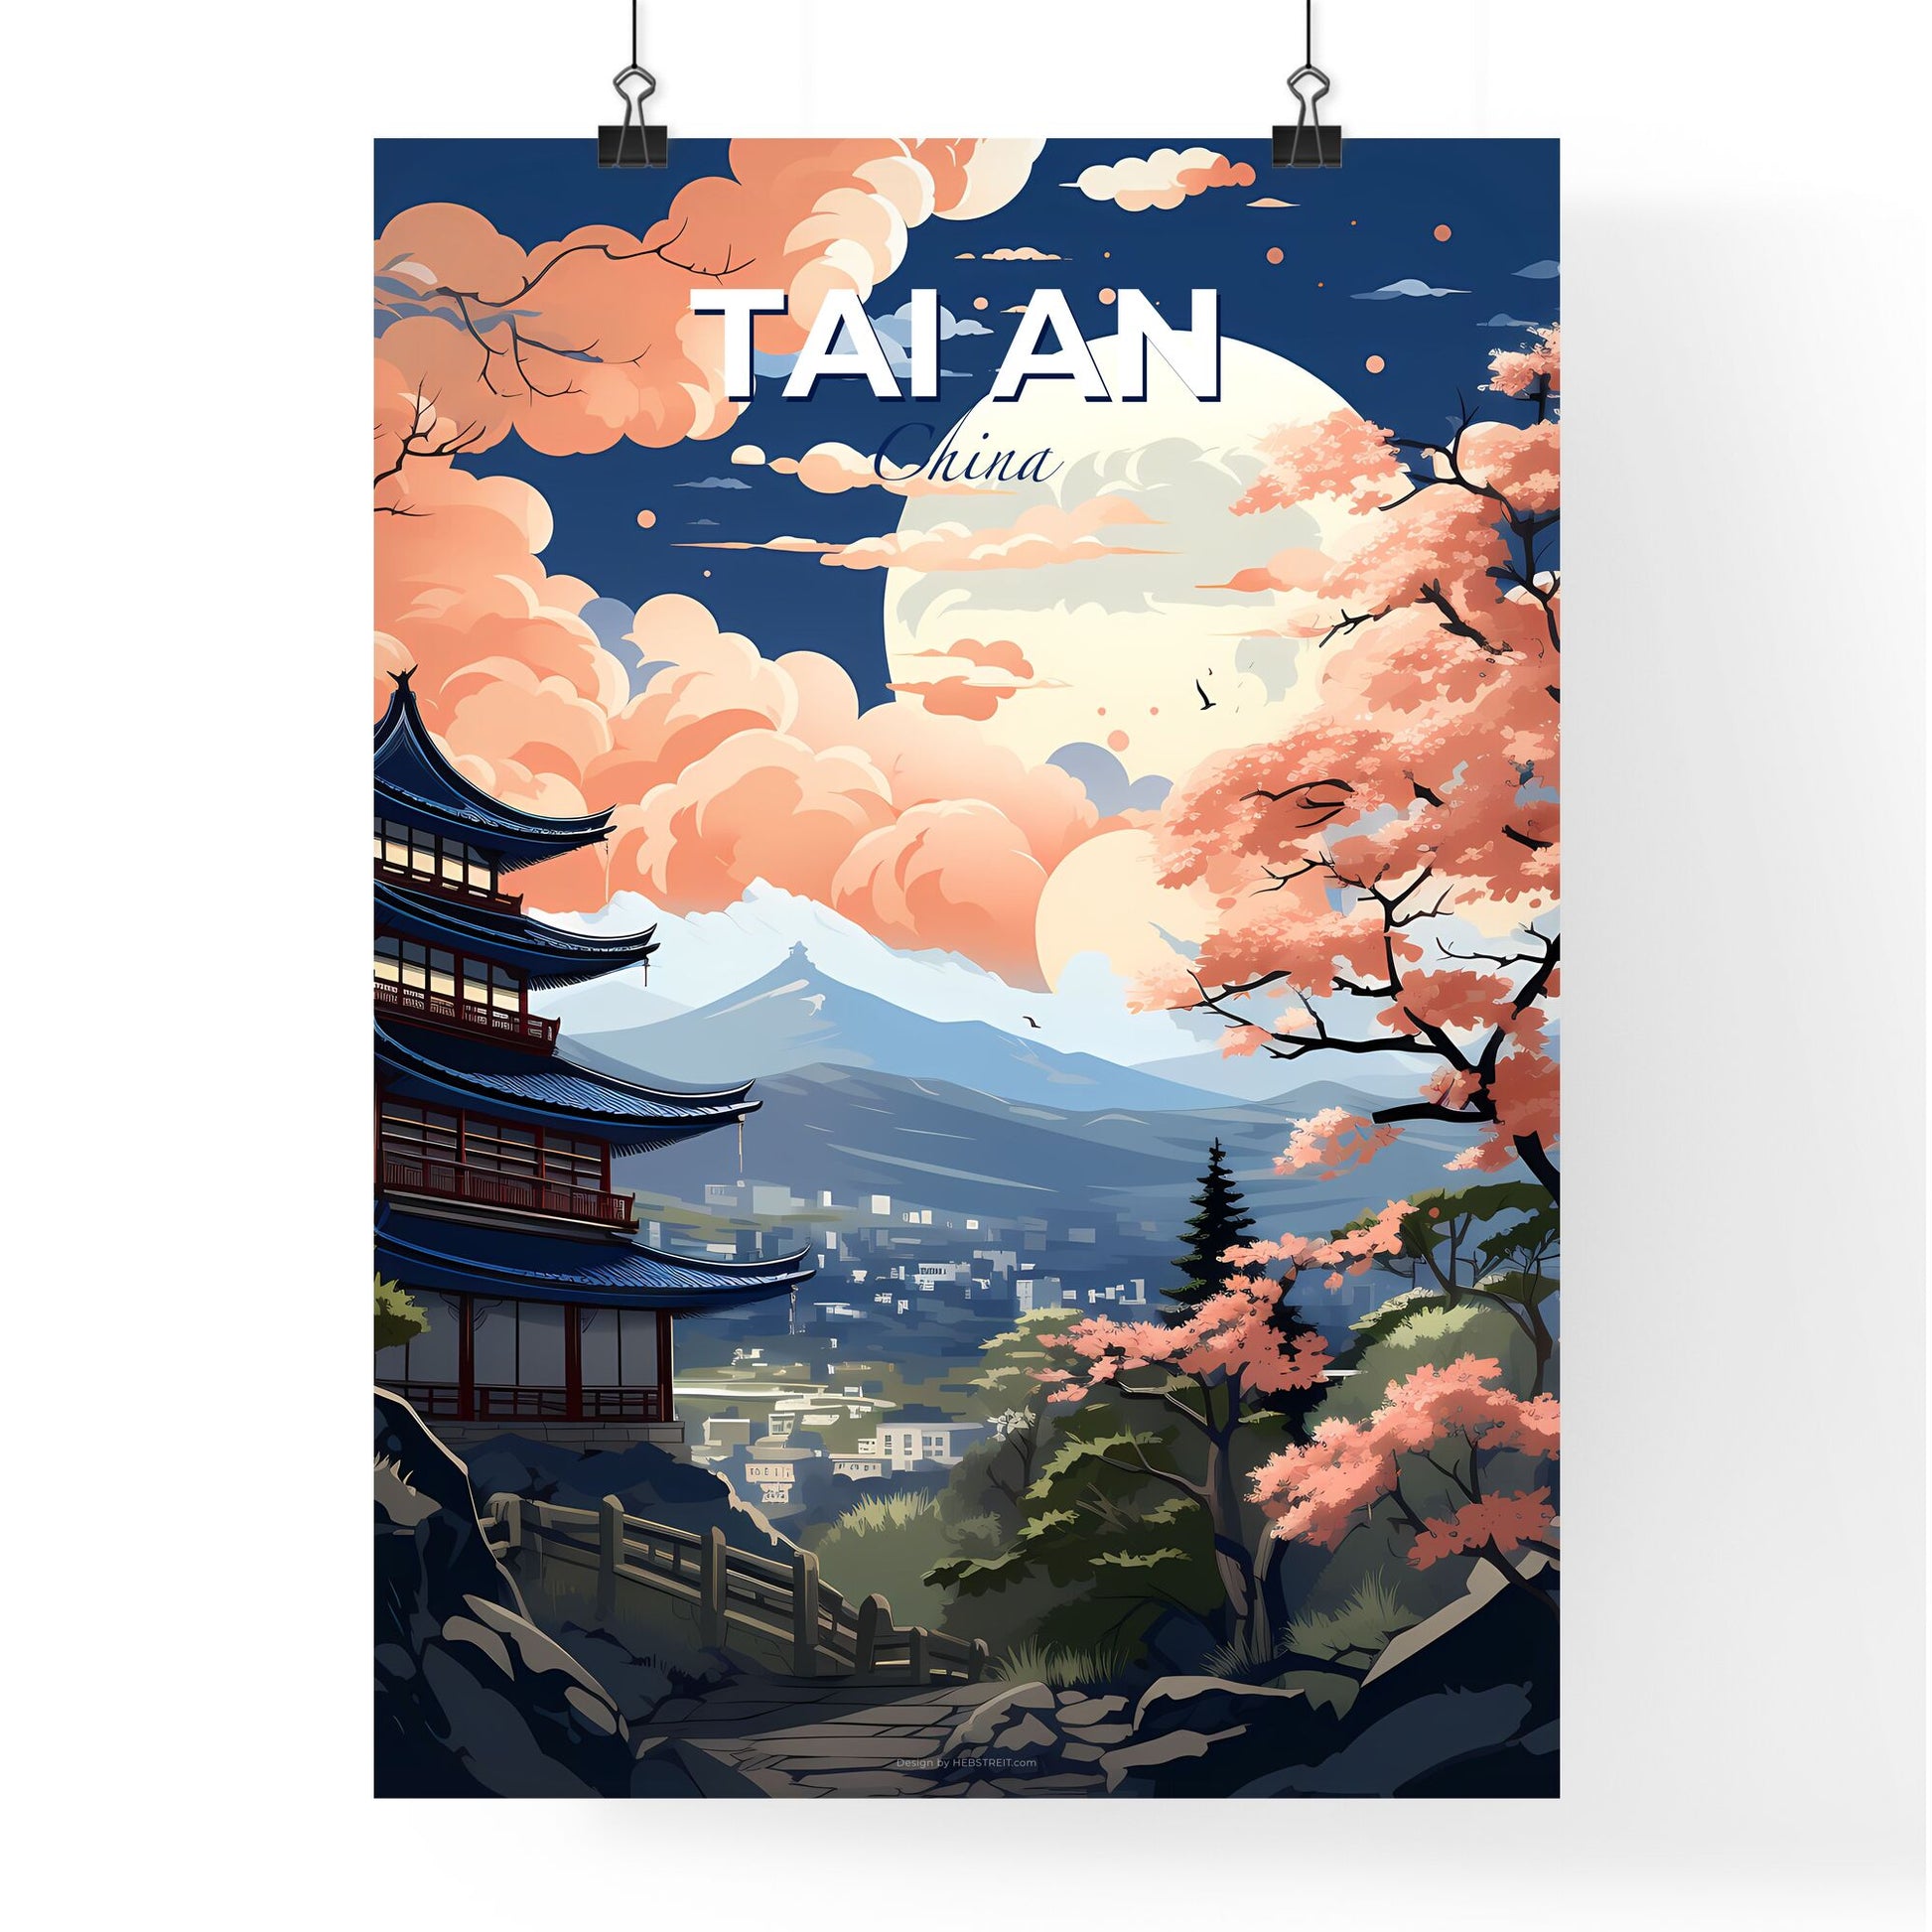 Tai an Cityscape Painting: Vibrant Artistic Skyline View, Mountain Scenery Art Print, Travel Poster Default Title